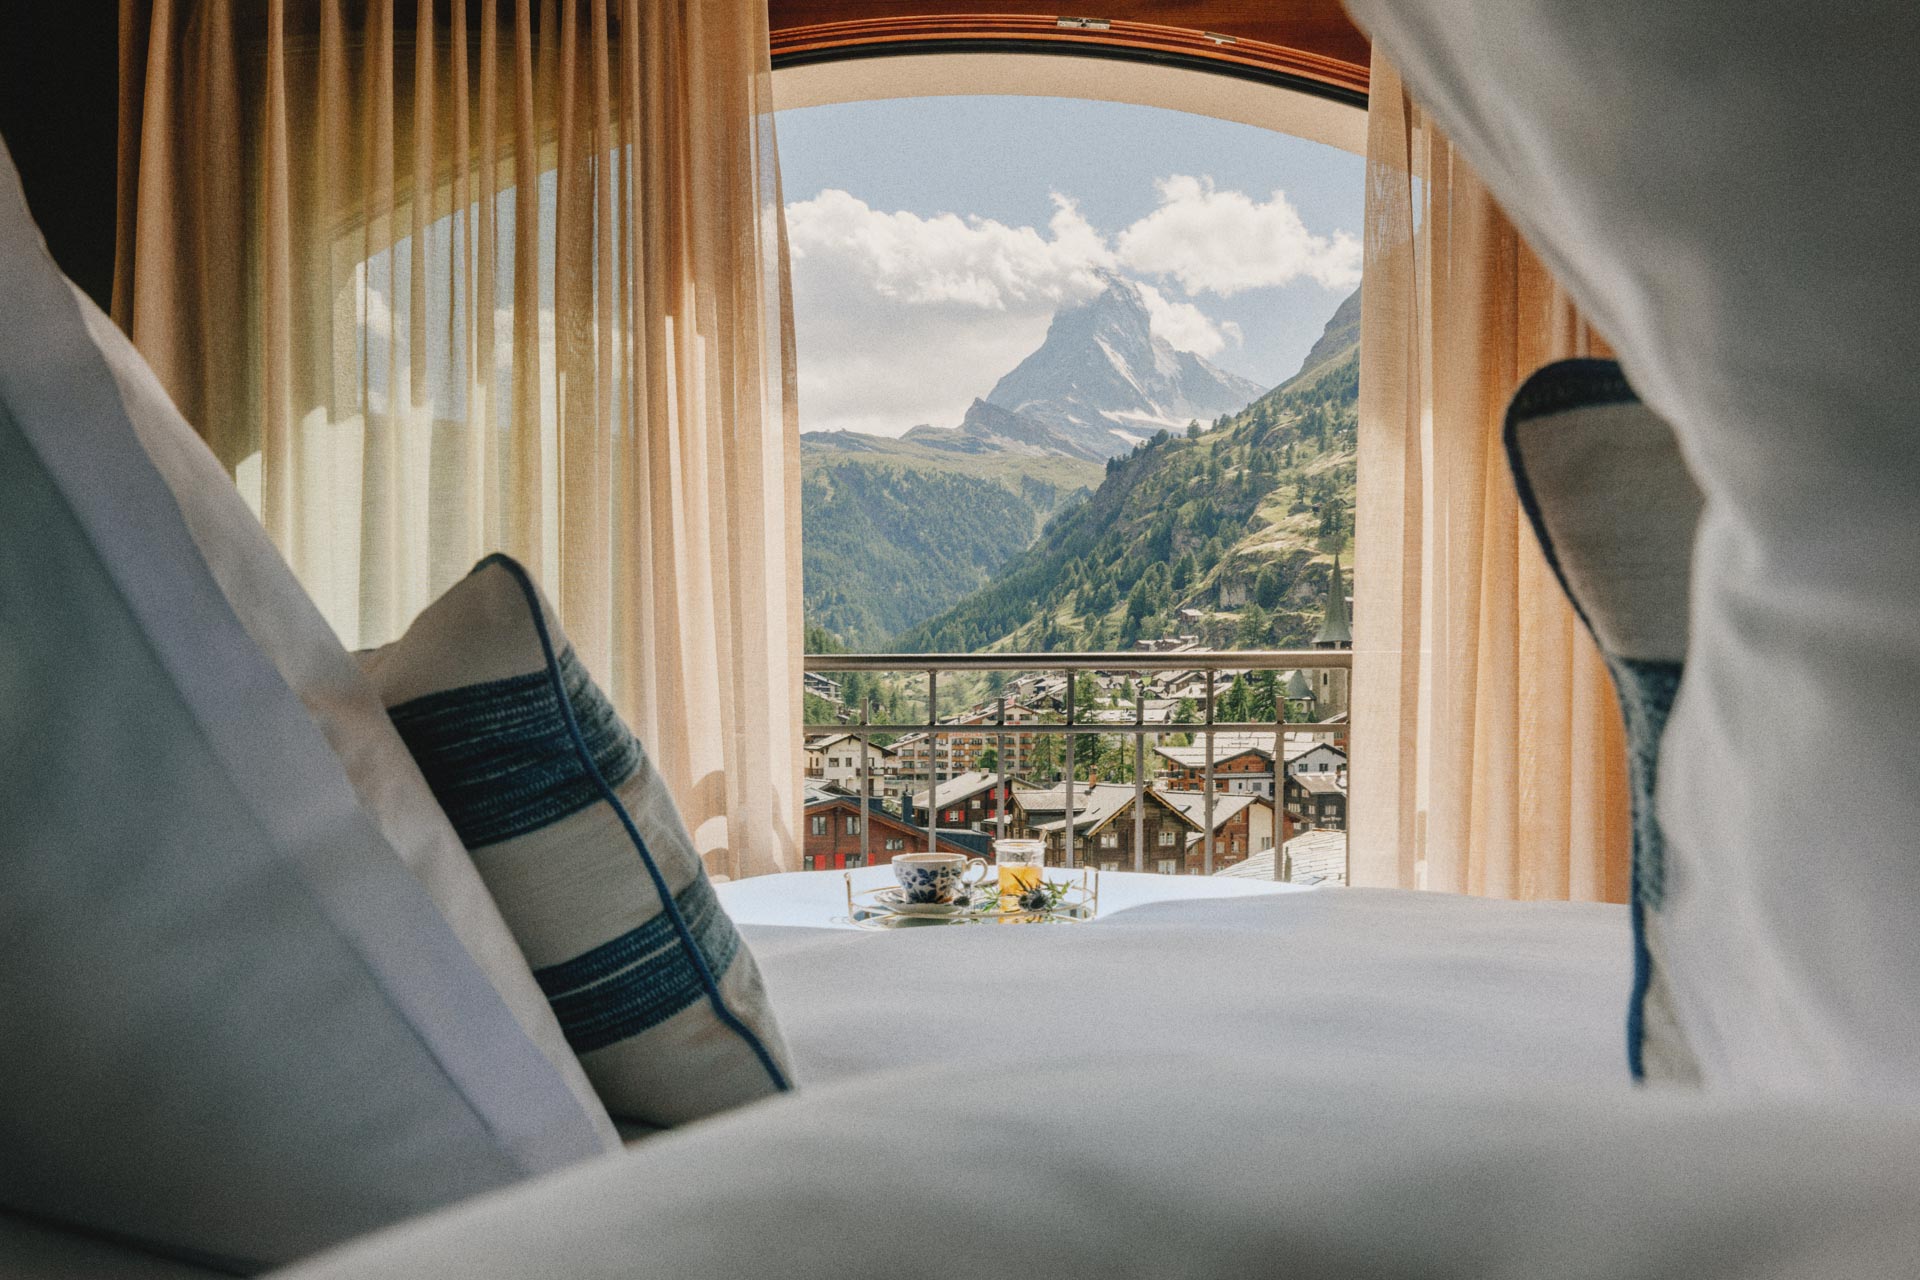 Guest Room with View of Mountains